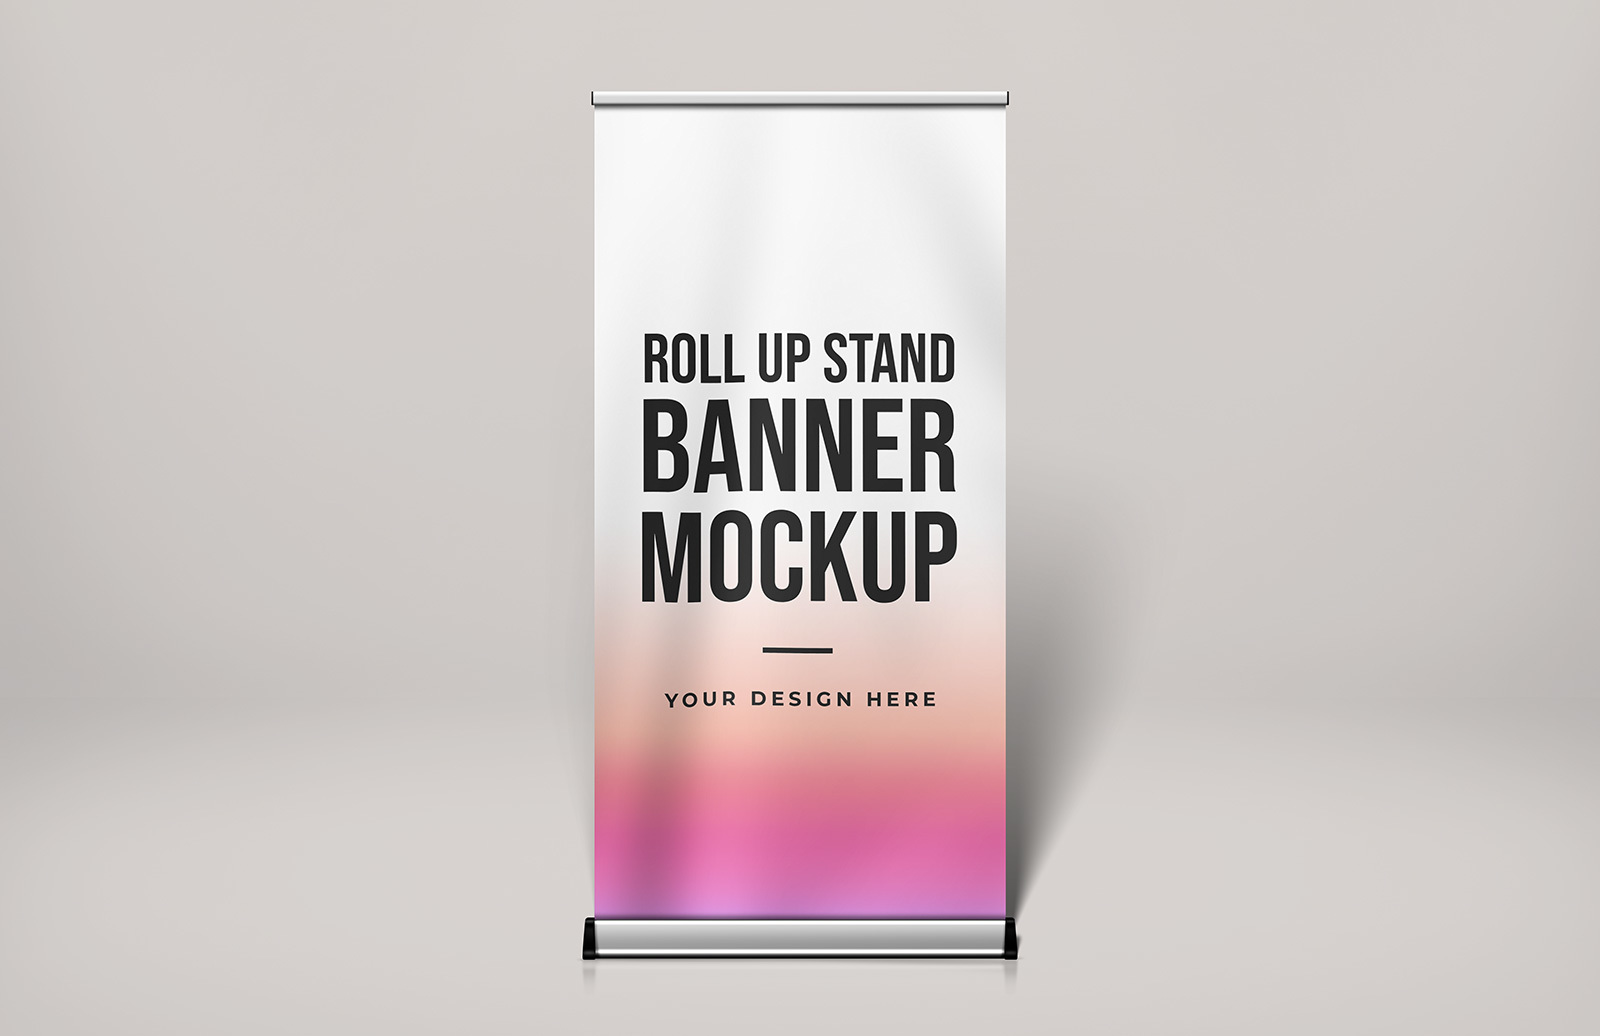 Download Free Roll Up Stand Banner Mockup